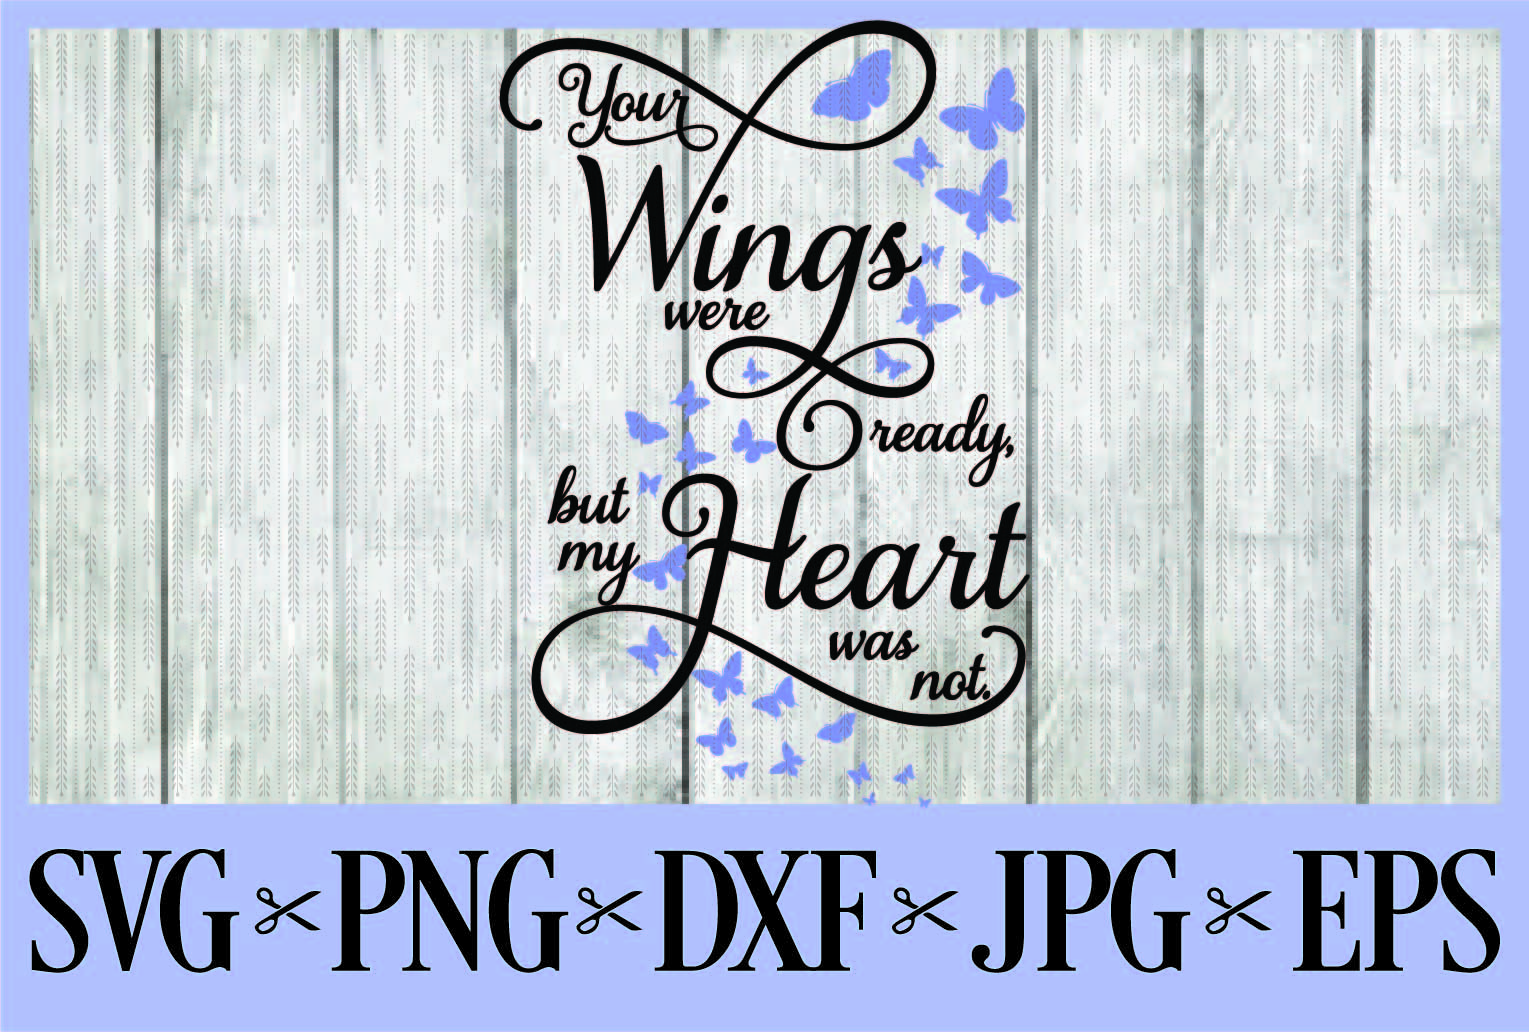 Download Your wings were ready, but my heart was not SVG PNG EPS ...